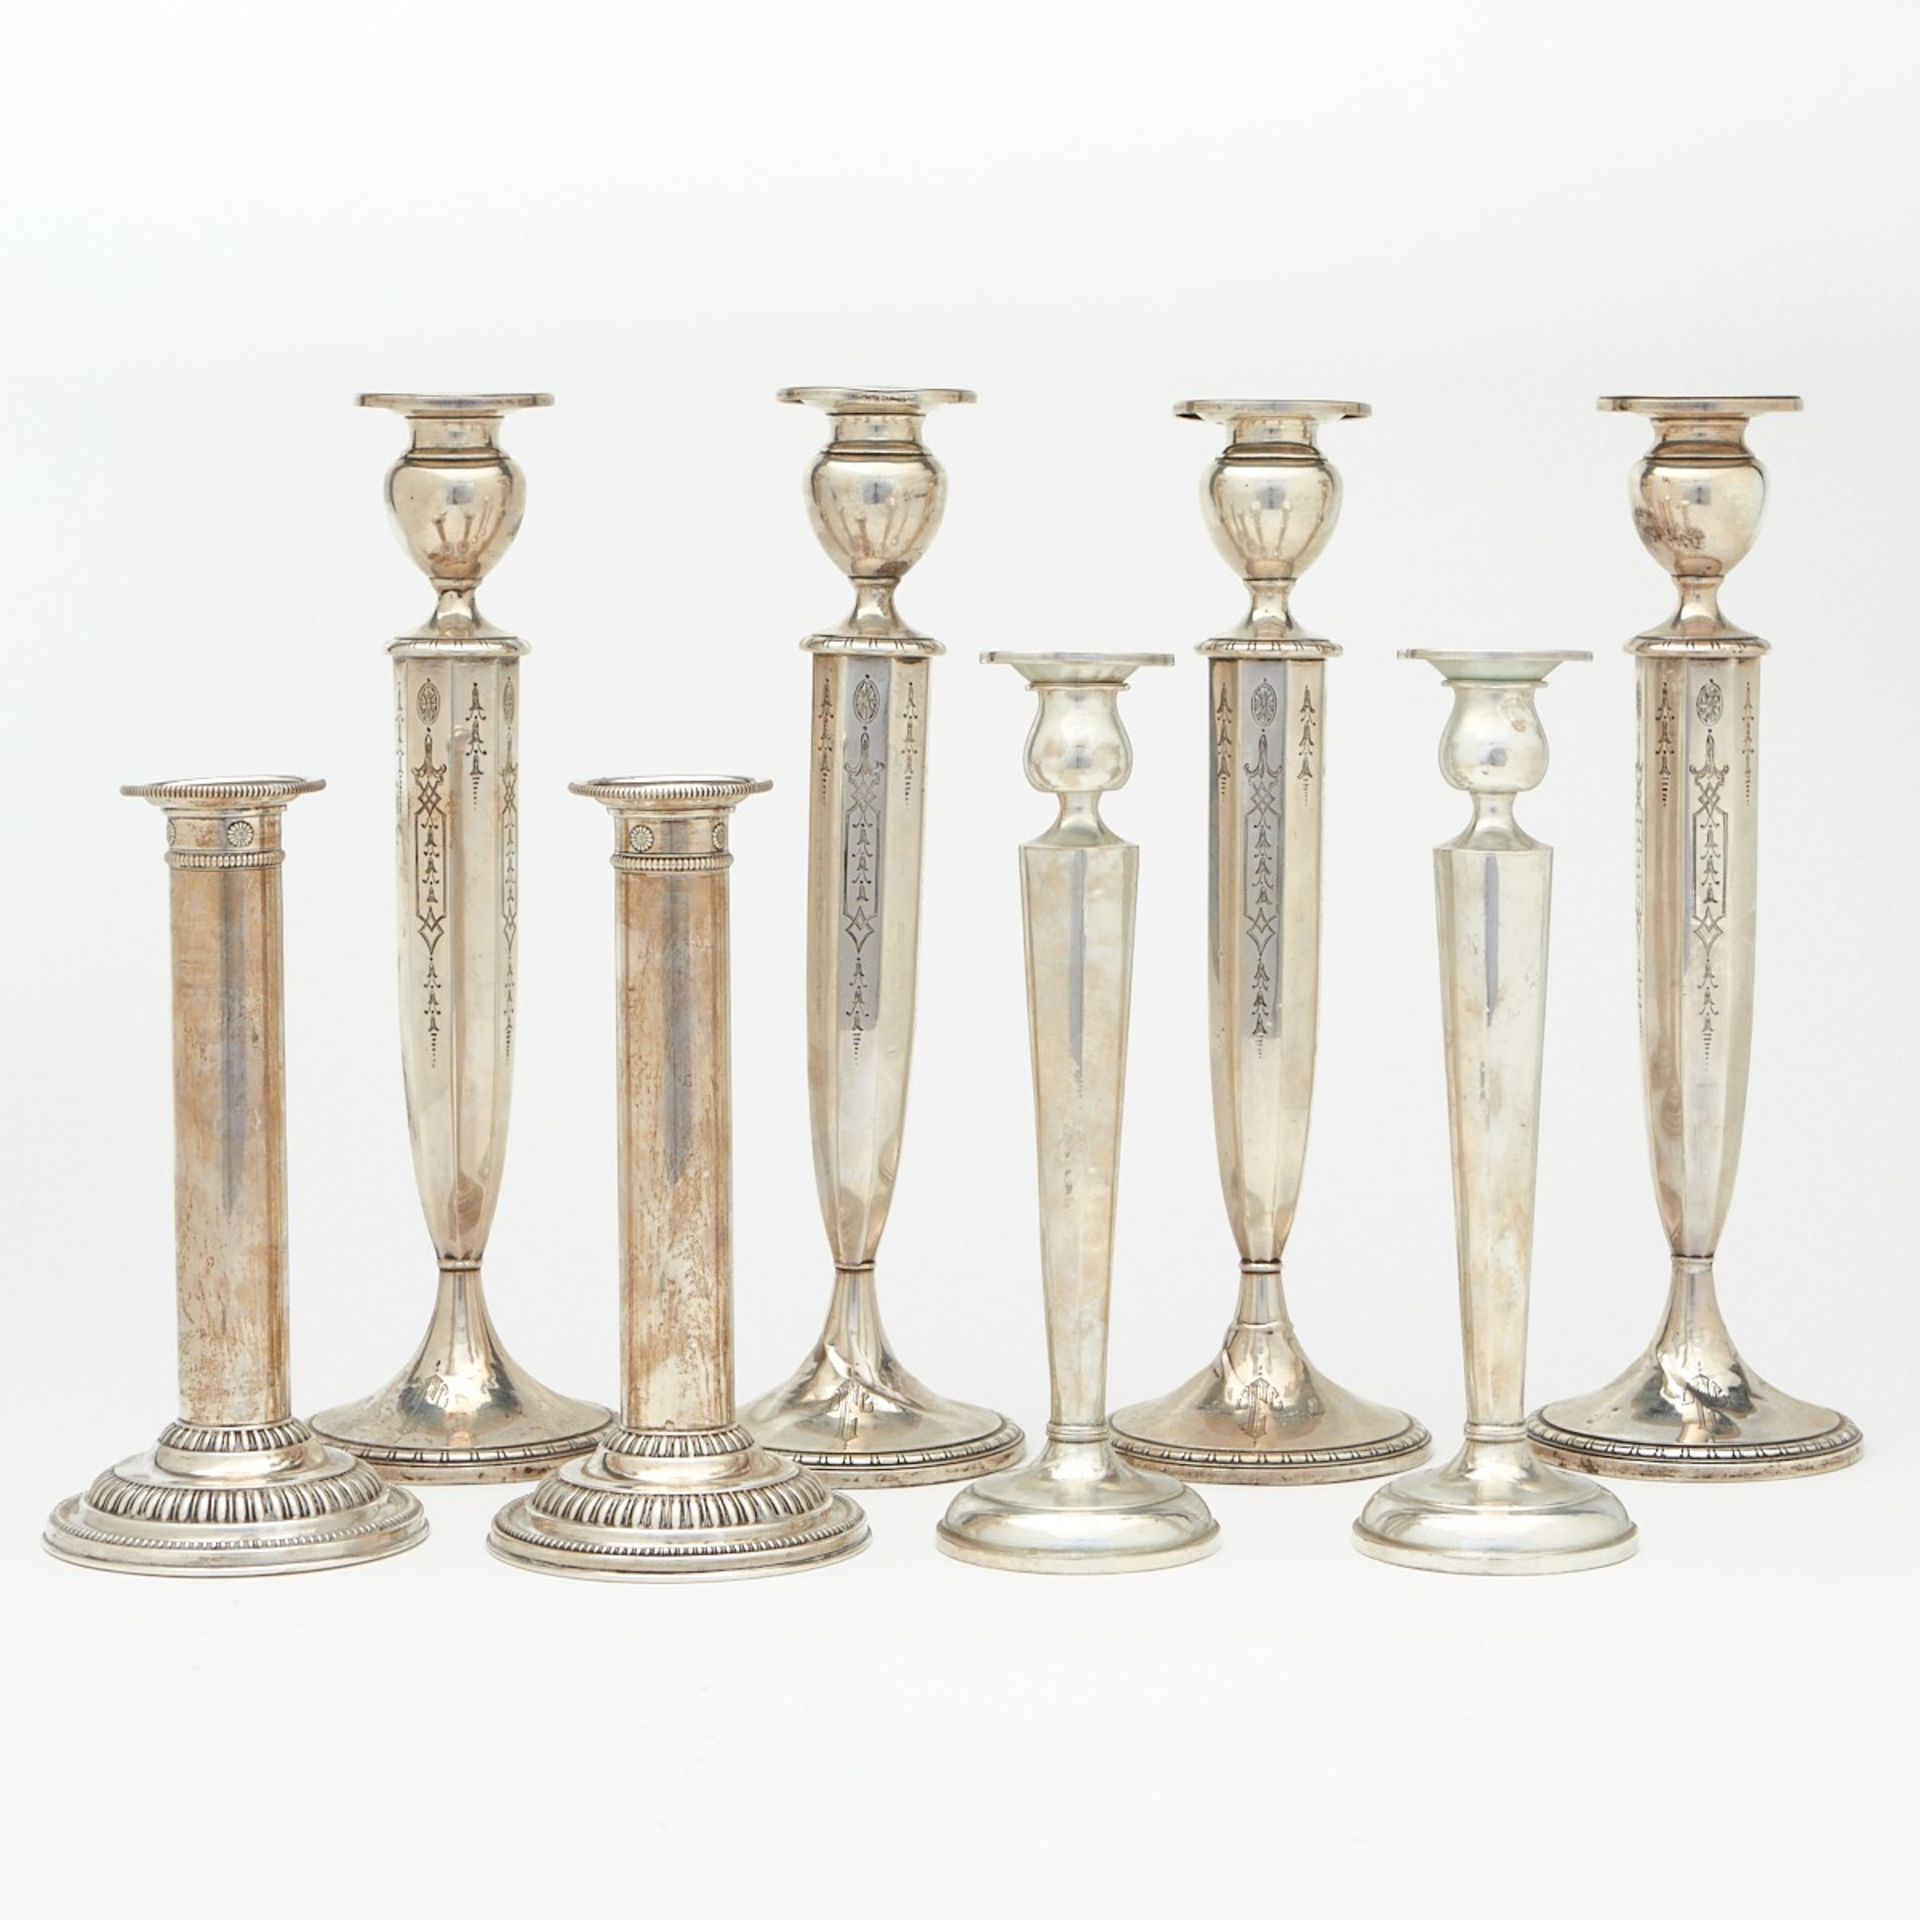 Grp: 8 Paired Sterling Silver Candlesticks